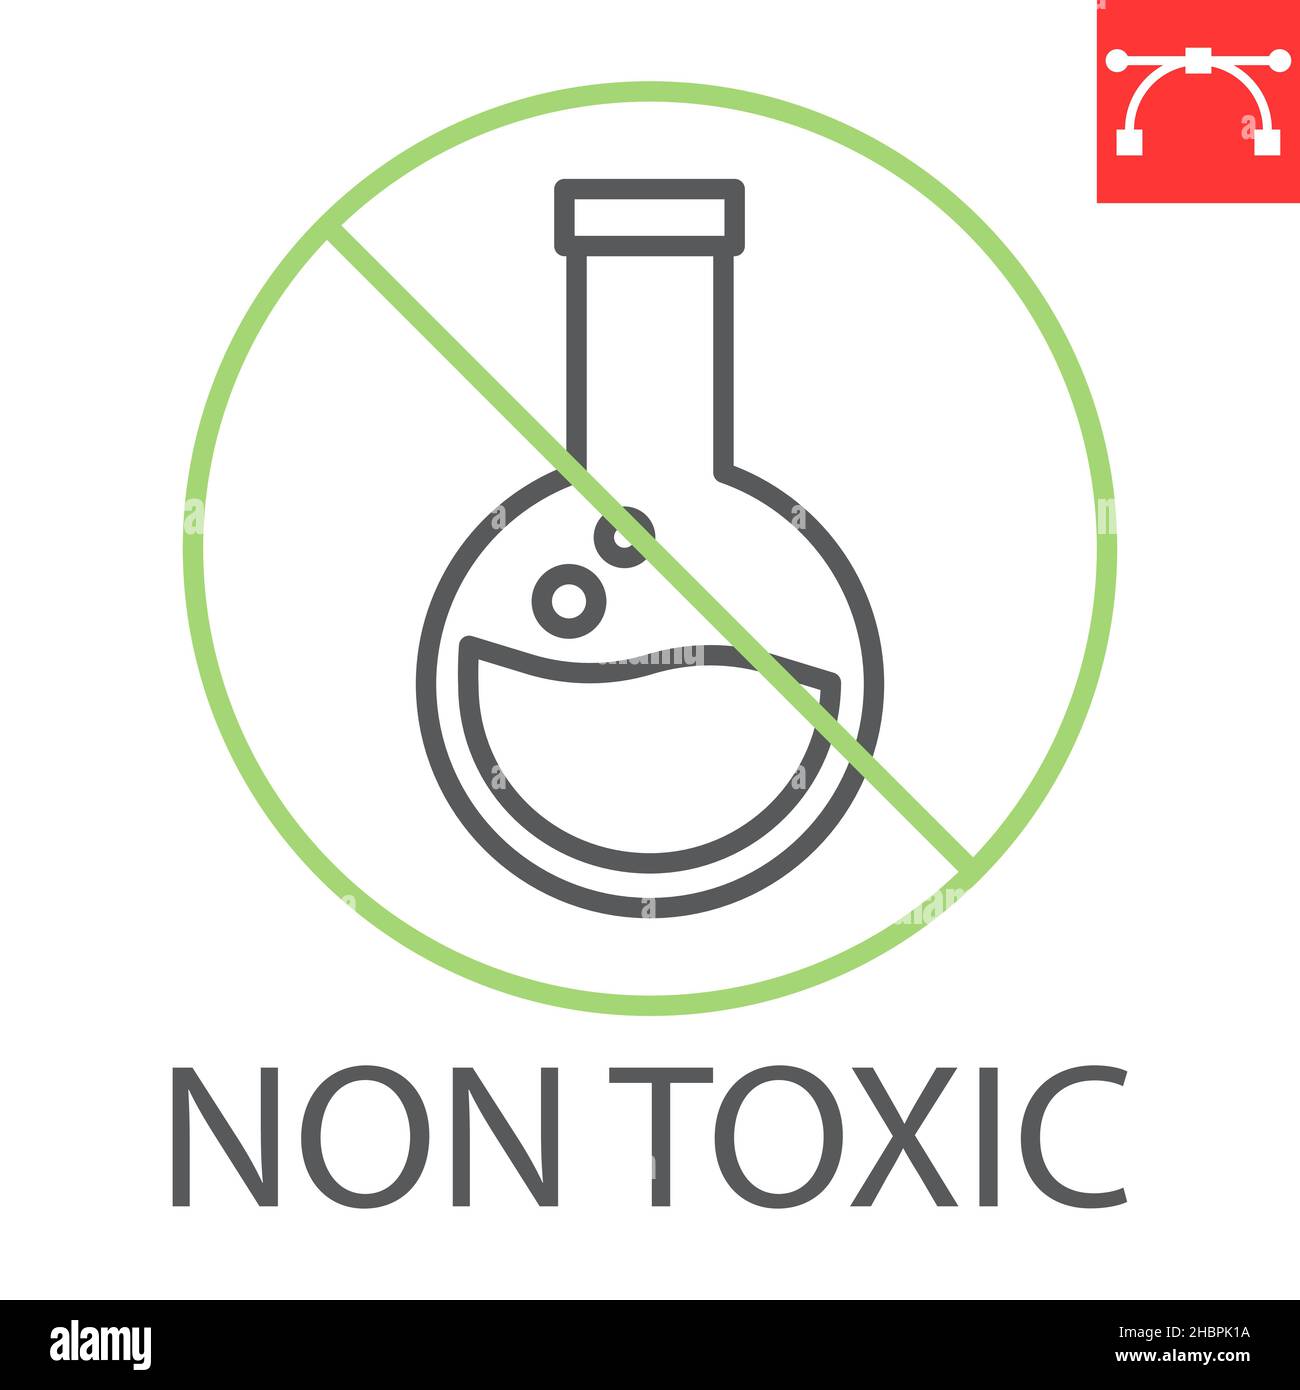 https://c8.alamy.com/comp/2HBPK1A/non-toxic-line-icon-product-and-natural-chemicals-free-vector-icon-vector-graphics-editable-stroke-outline-sign-eps-10-2HBPK1A.jpg